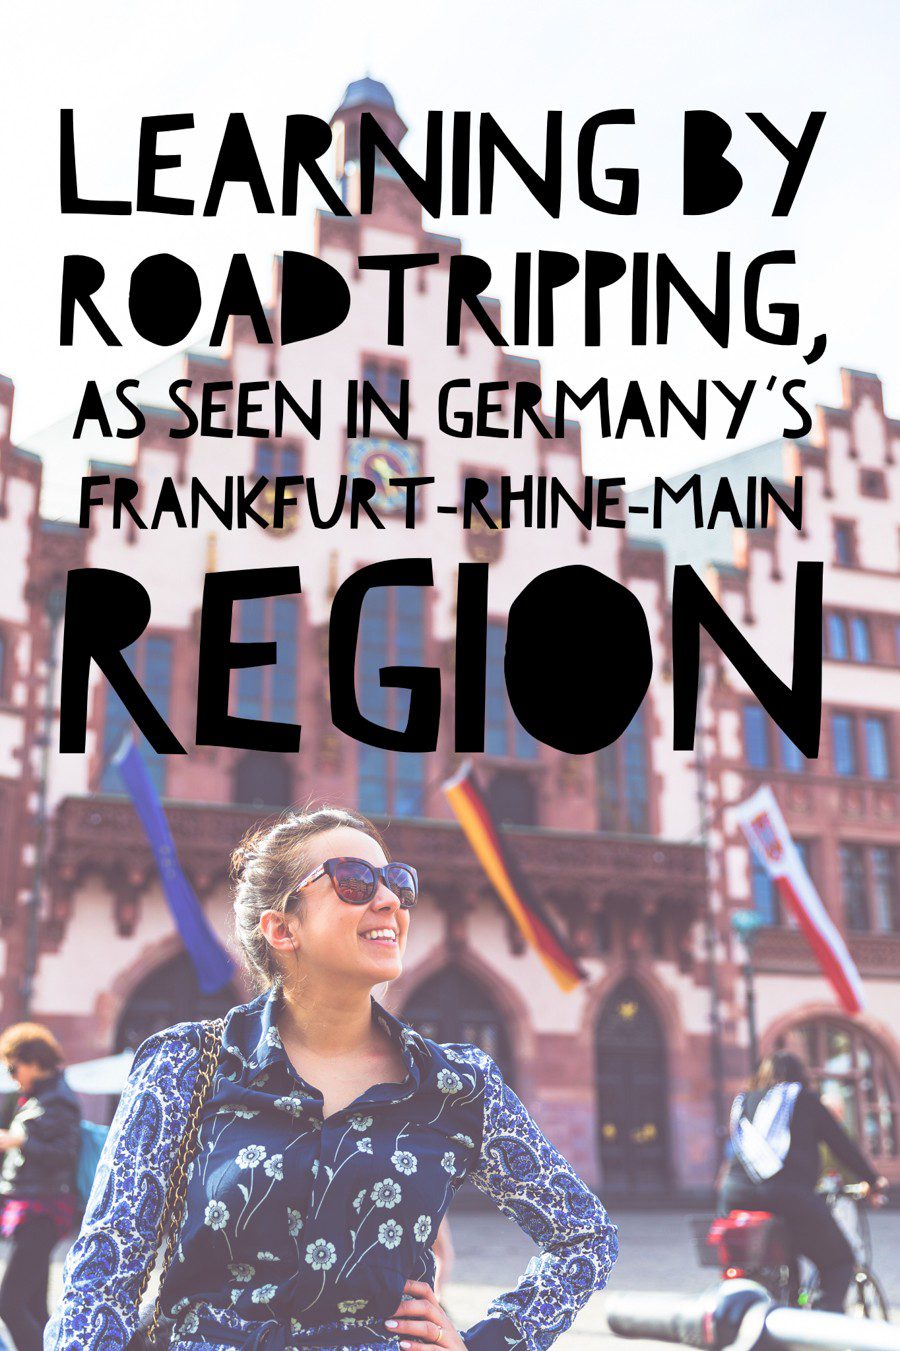 Why taking a road trip can be the best way to learn while traveling, explained by travel blogger JQ Louise, who roadtripped through Germany's Frankfurt-Rhine-Main region. This European gem is full of food, castles and sight-seeing, and road-tripping opens up local experiences. #Travel #Germany #RoadTrip